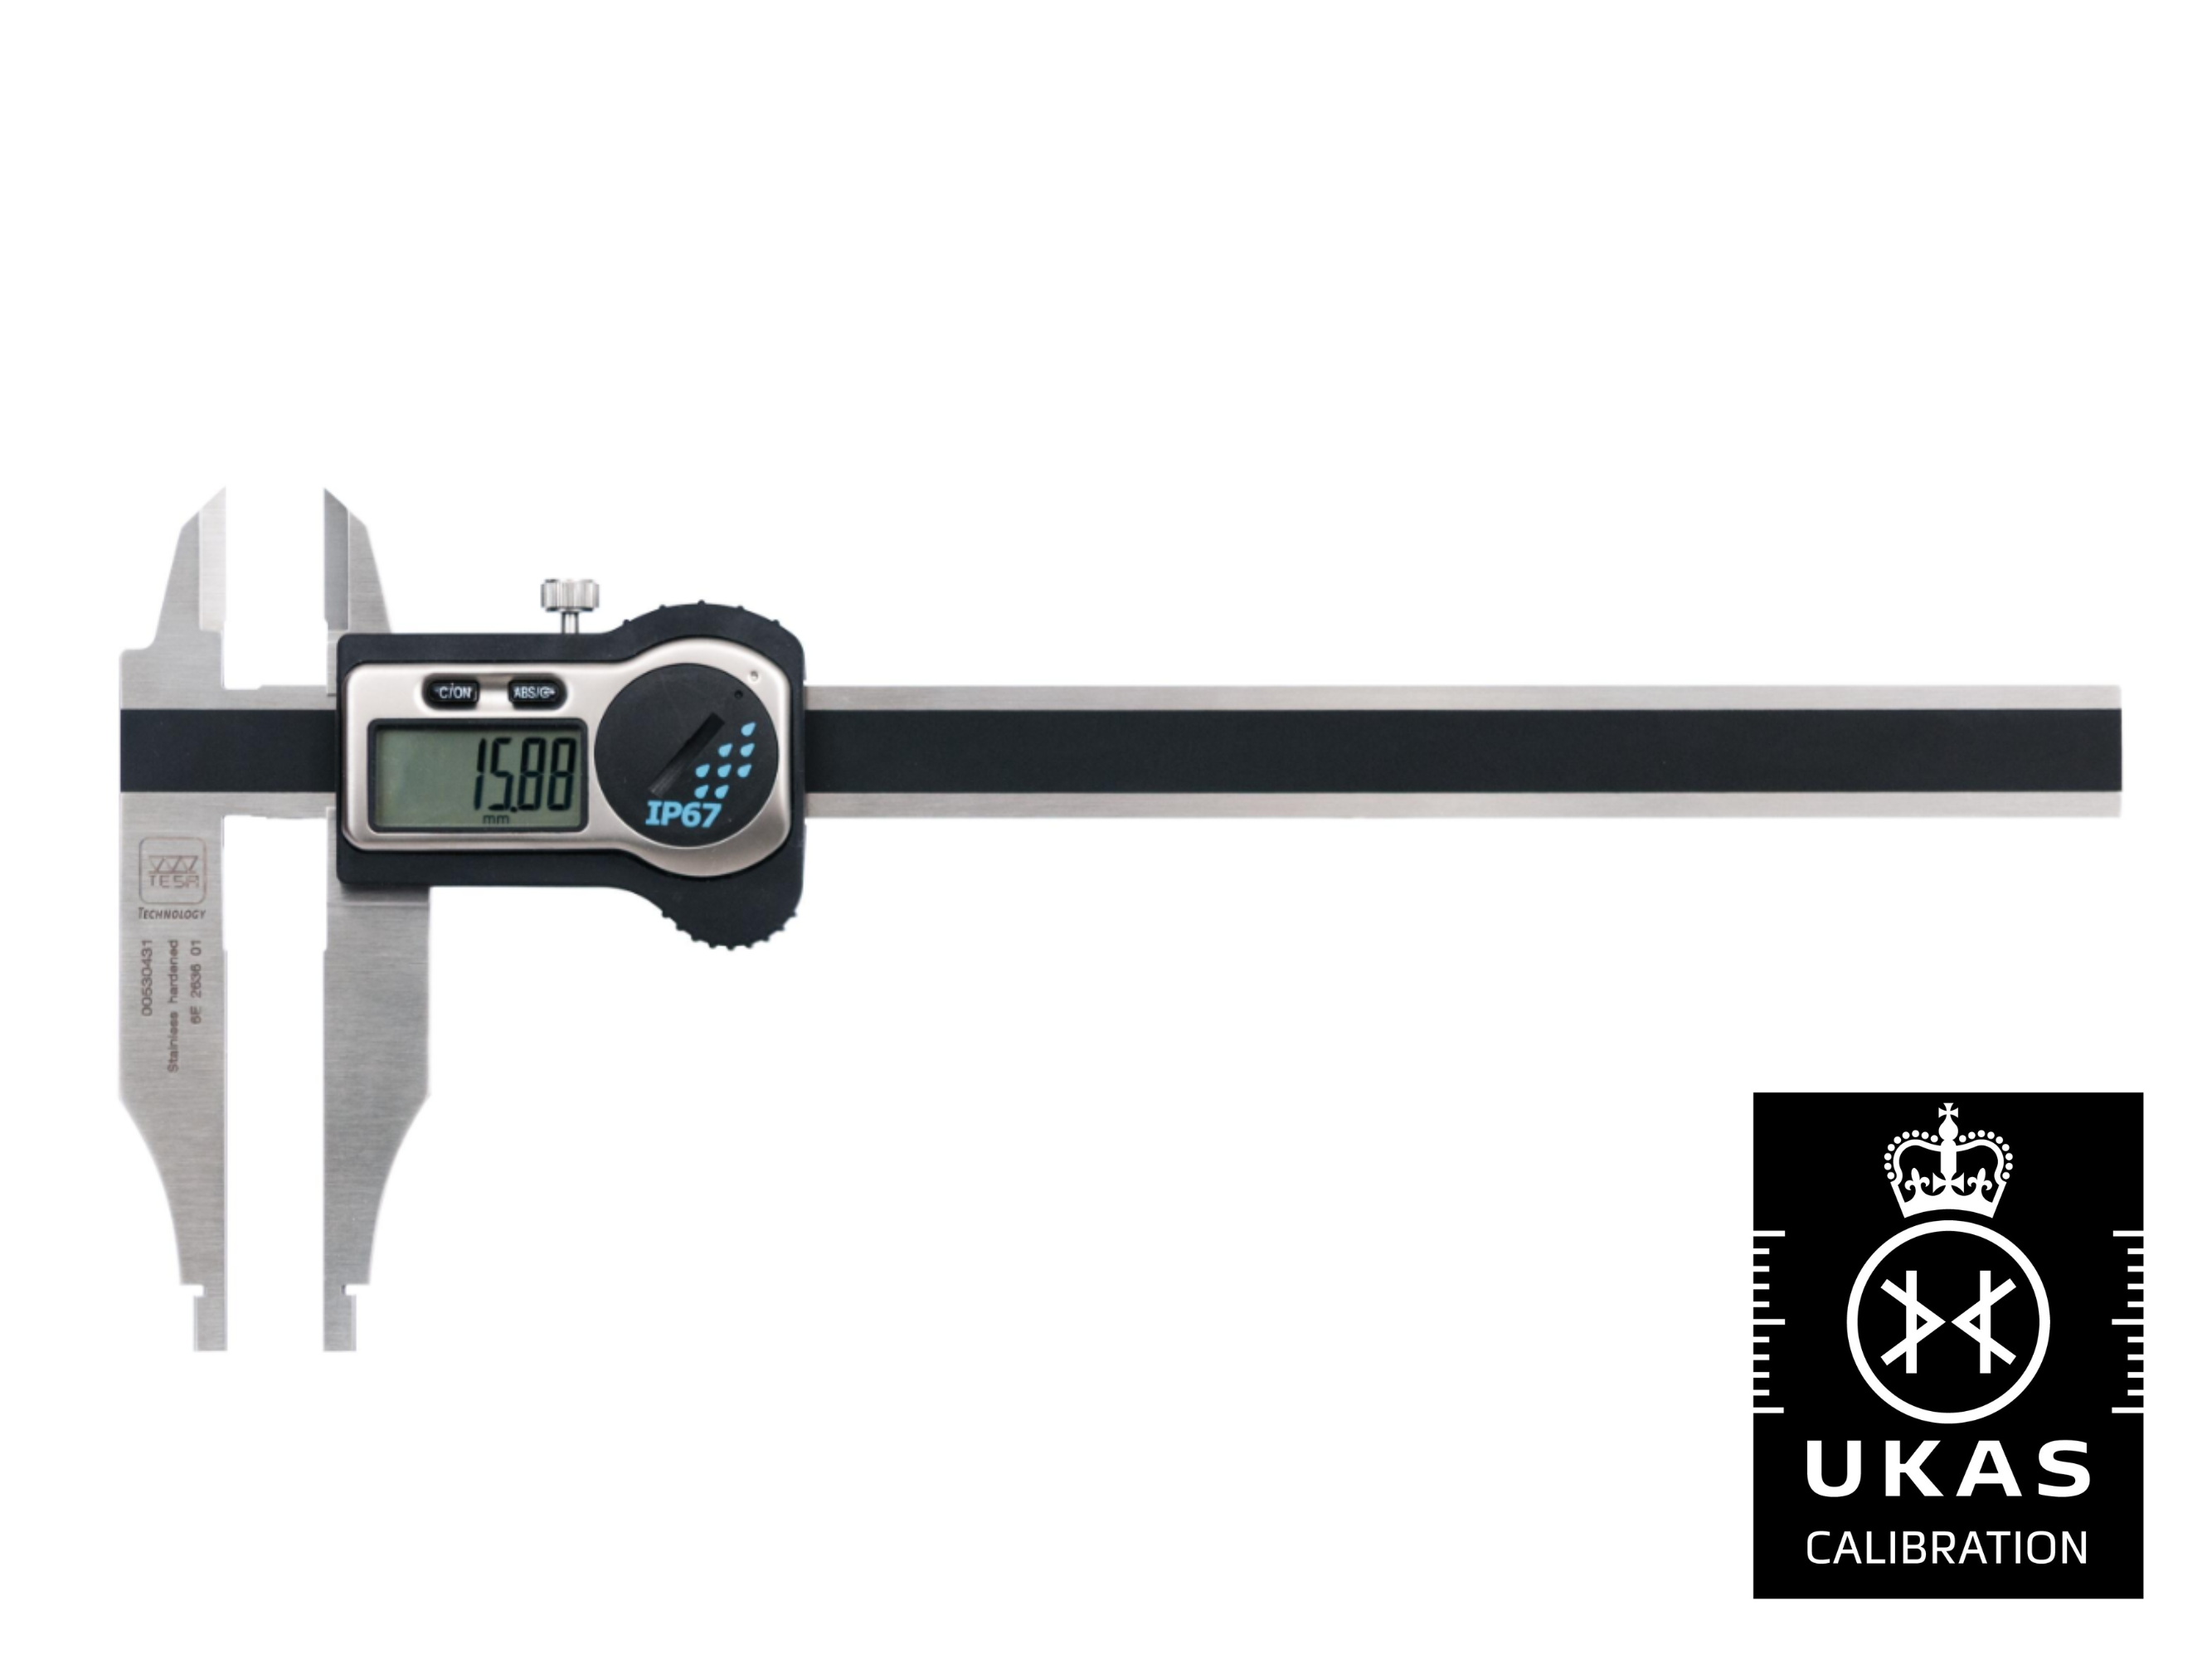 Tesa Digital workshop caliper, with rounded internal measuring faces & knife-edge external jaws, 1000 mm 00530437  with UKAS Calibration